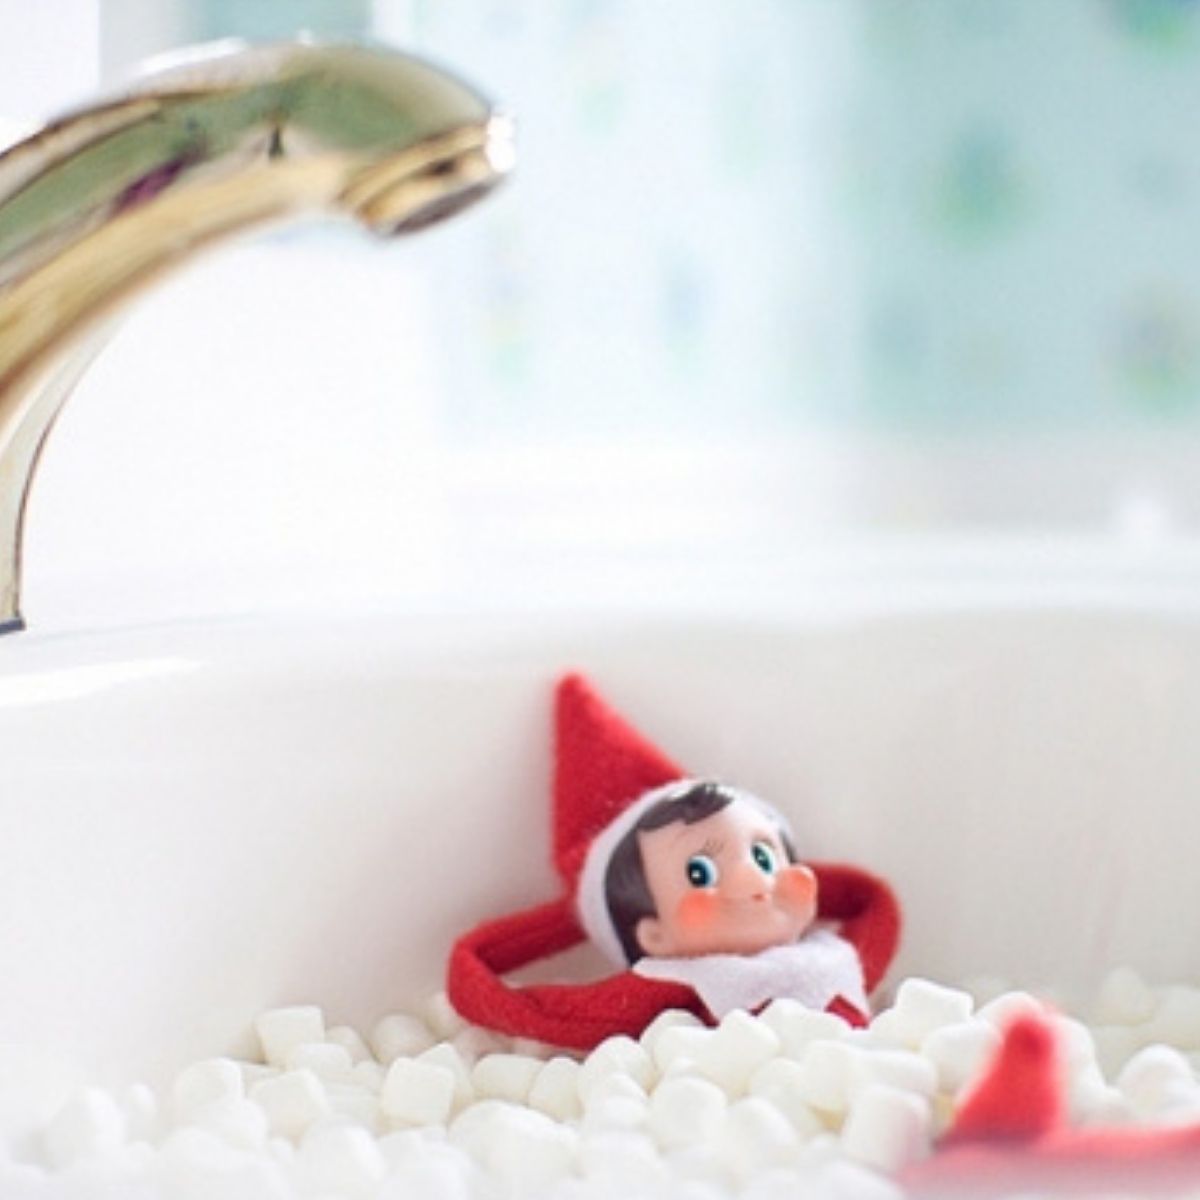 The Elf on the Shelf is soaking in a sink full of mini marshmallows.